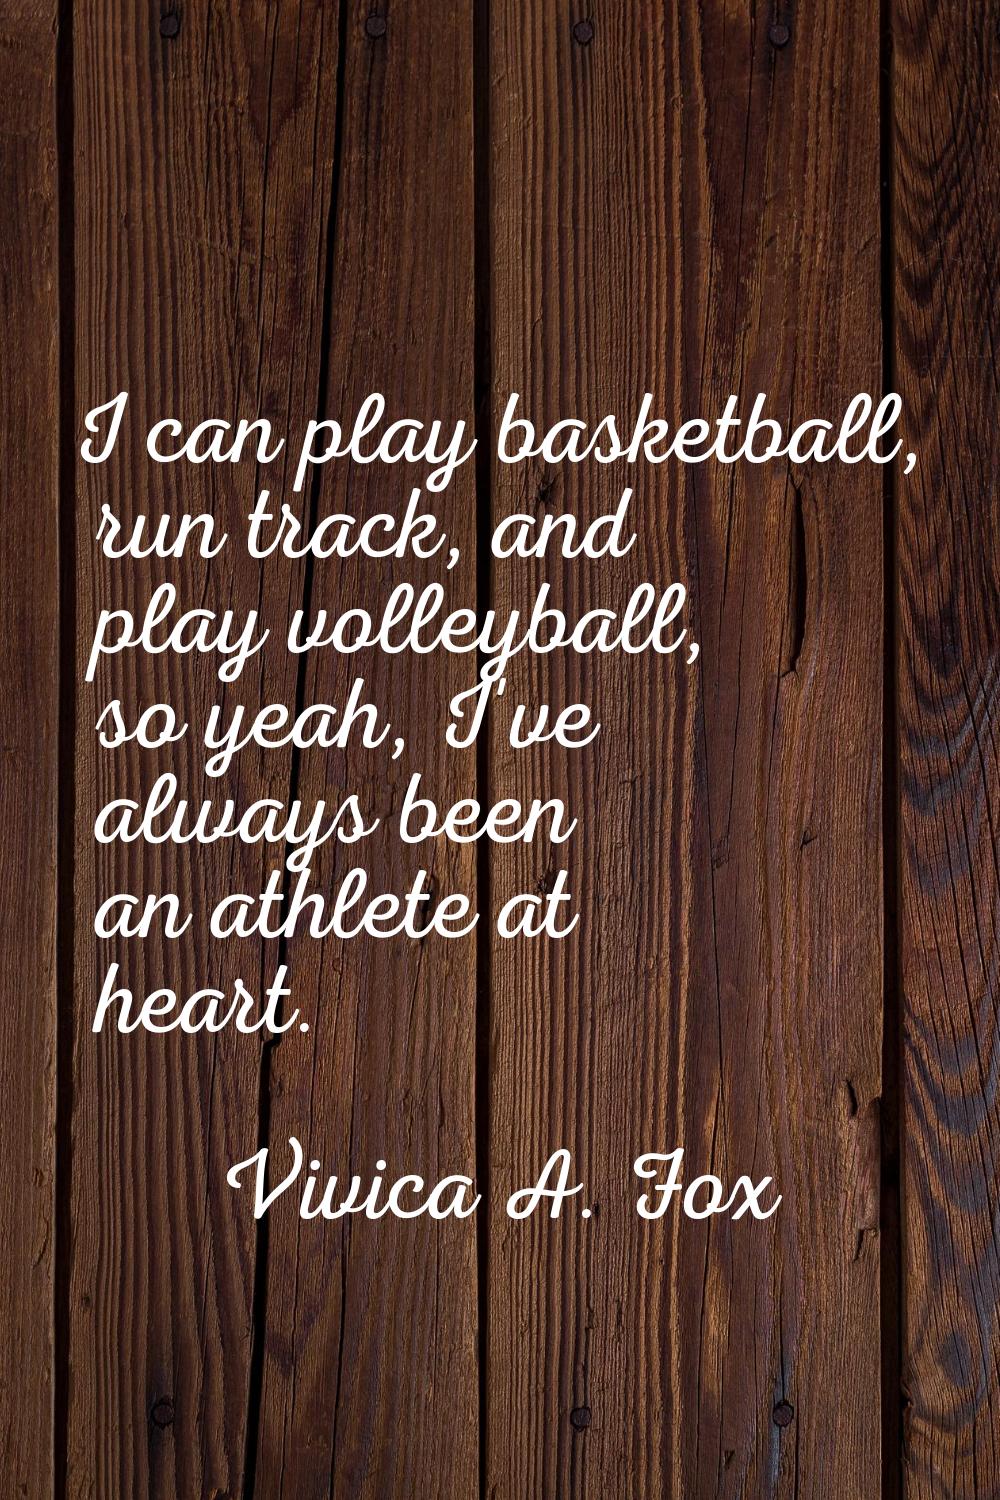 I can play basketball, run track, and play volleyball, so yeah, I've always been an athlete at hear